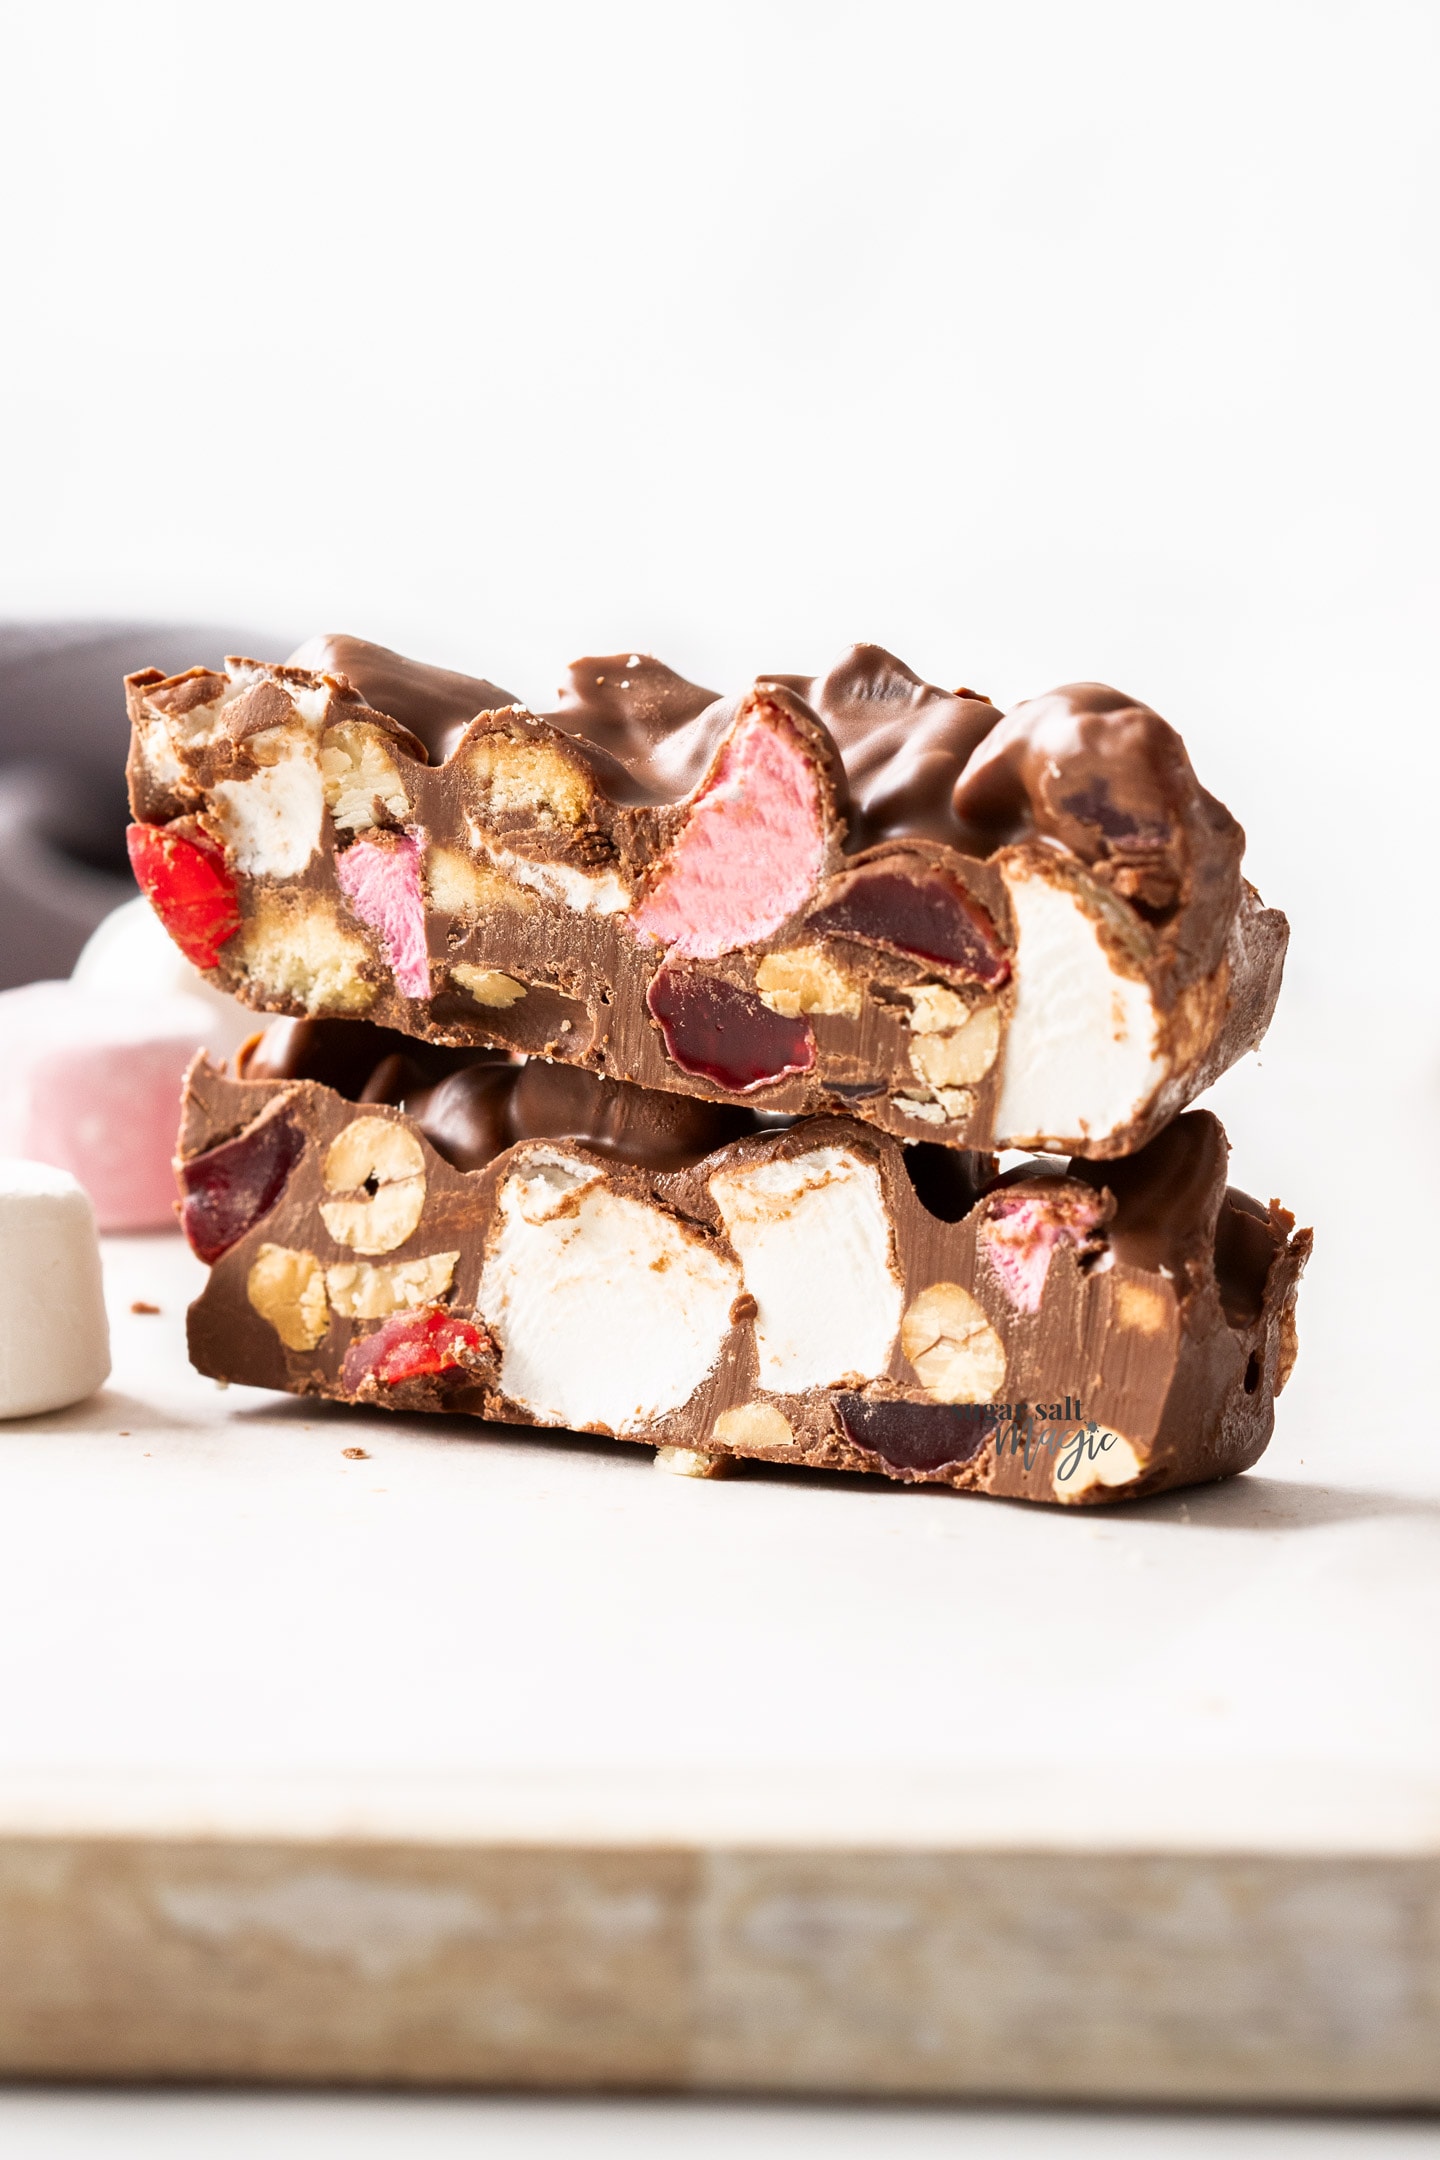 Two slices of rocky road stacked.